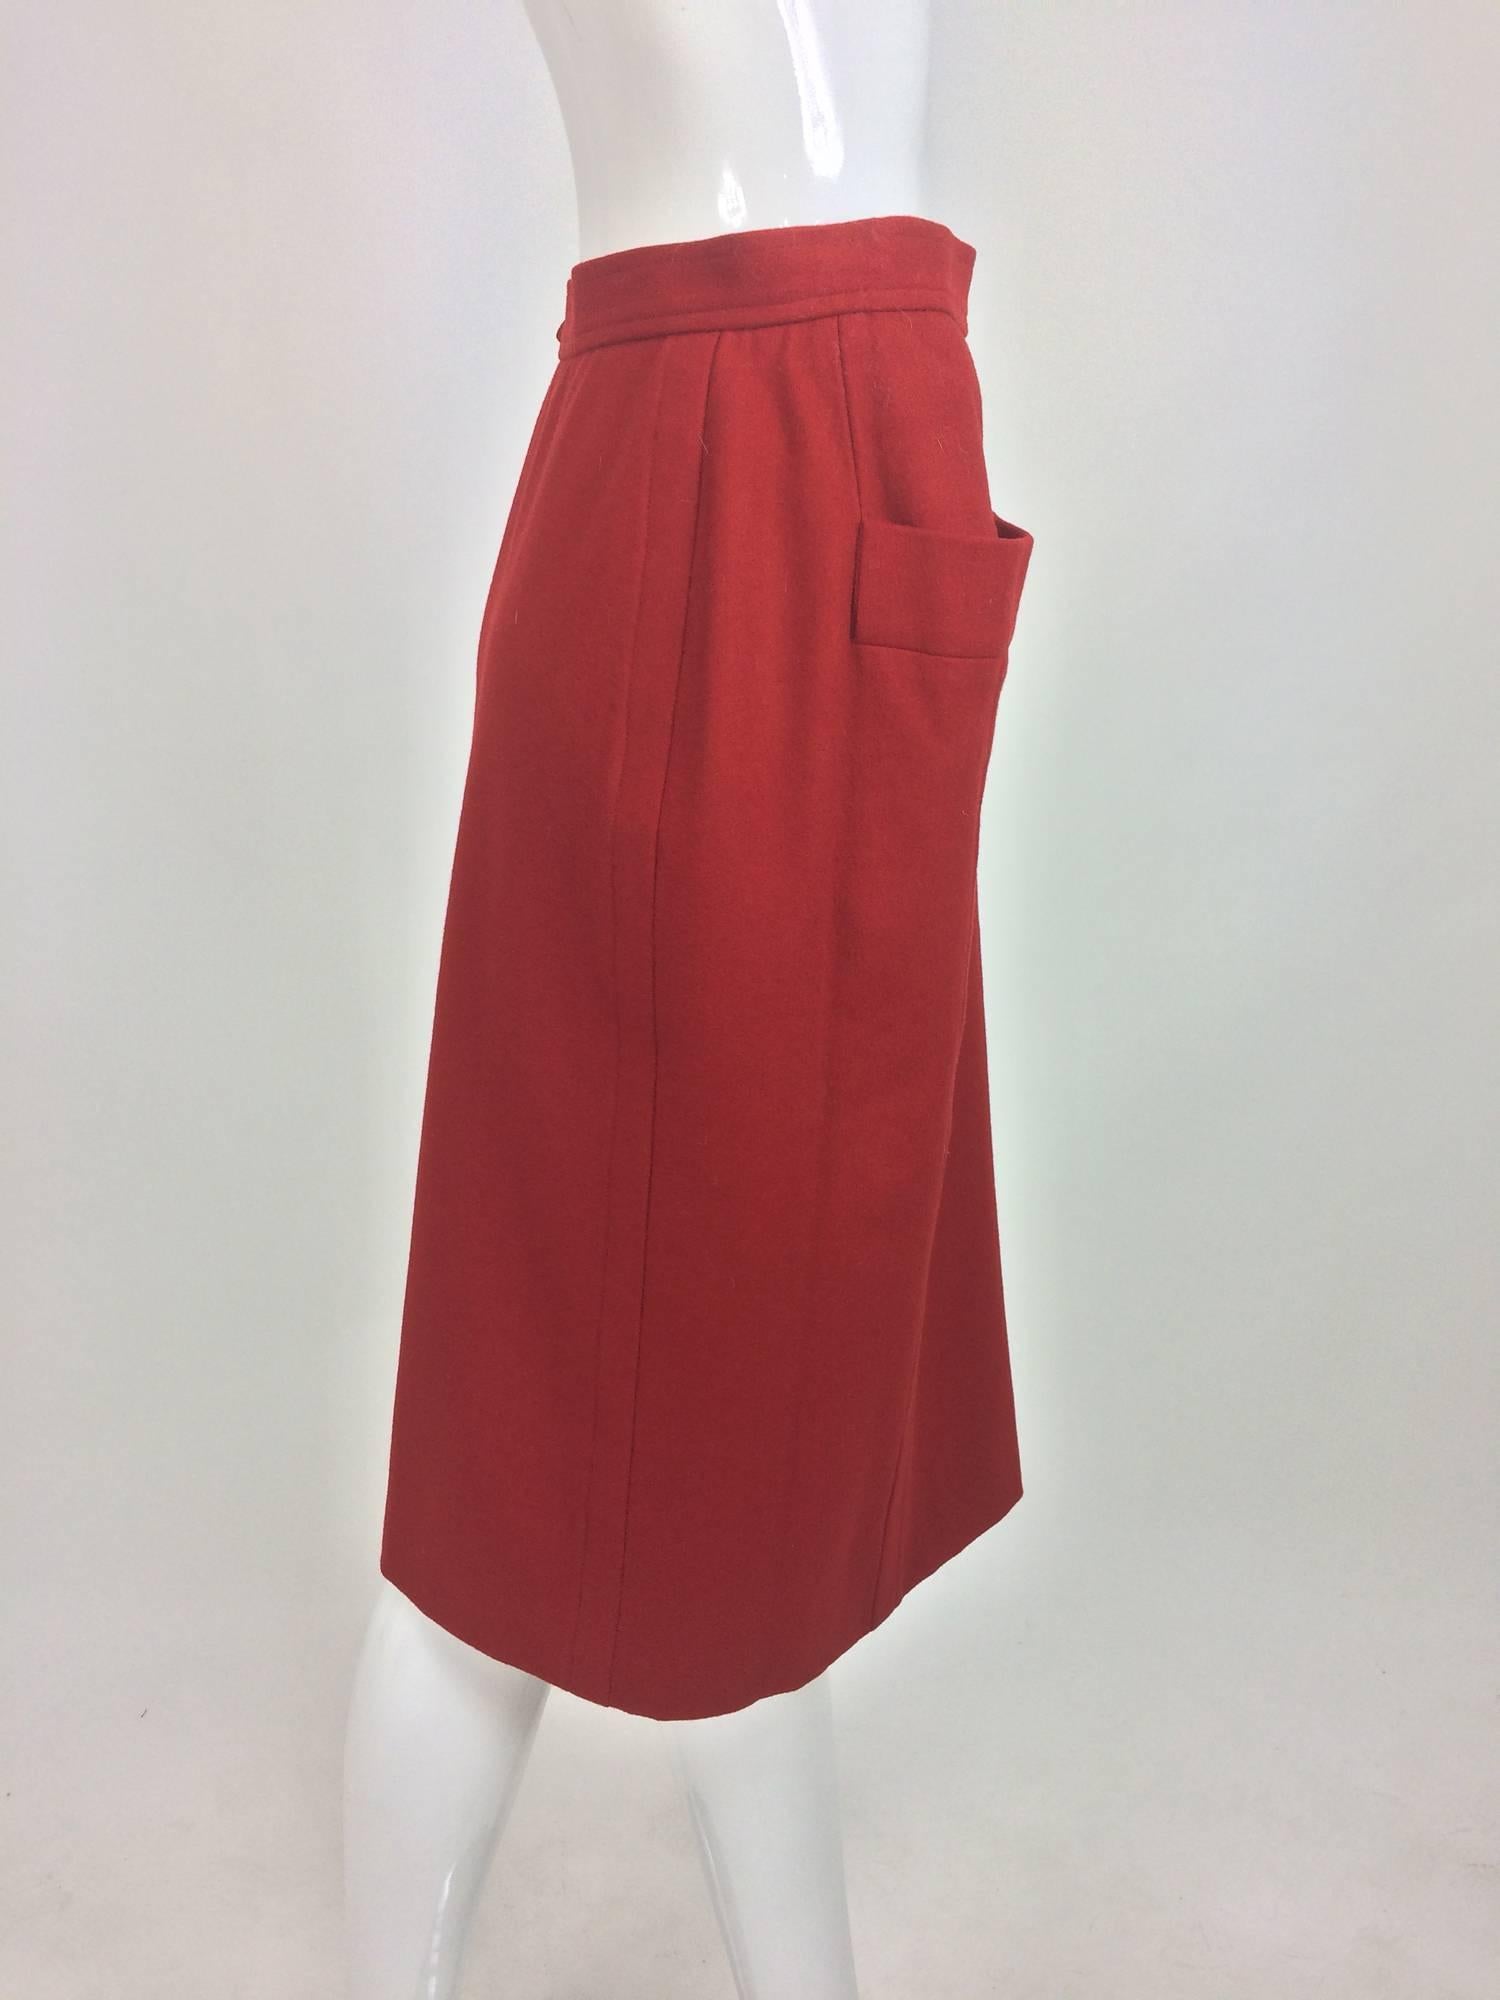 Red Vintage Yves Saint Laurent brick red wool skirt with hip front pockets 1980s